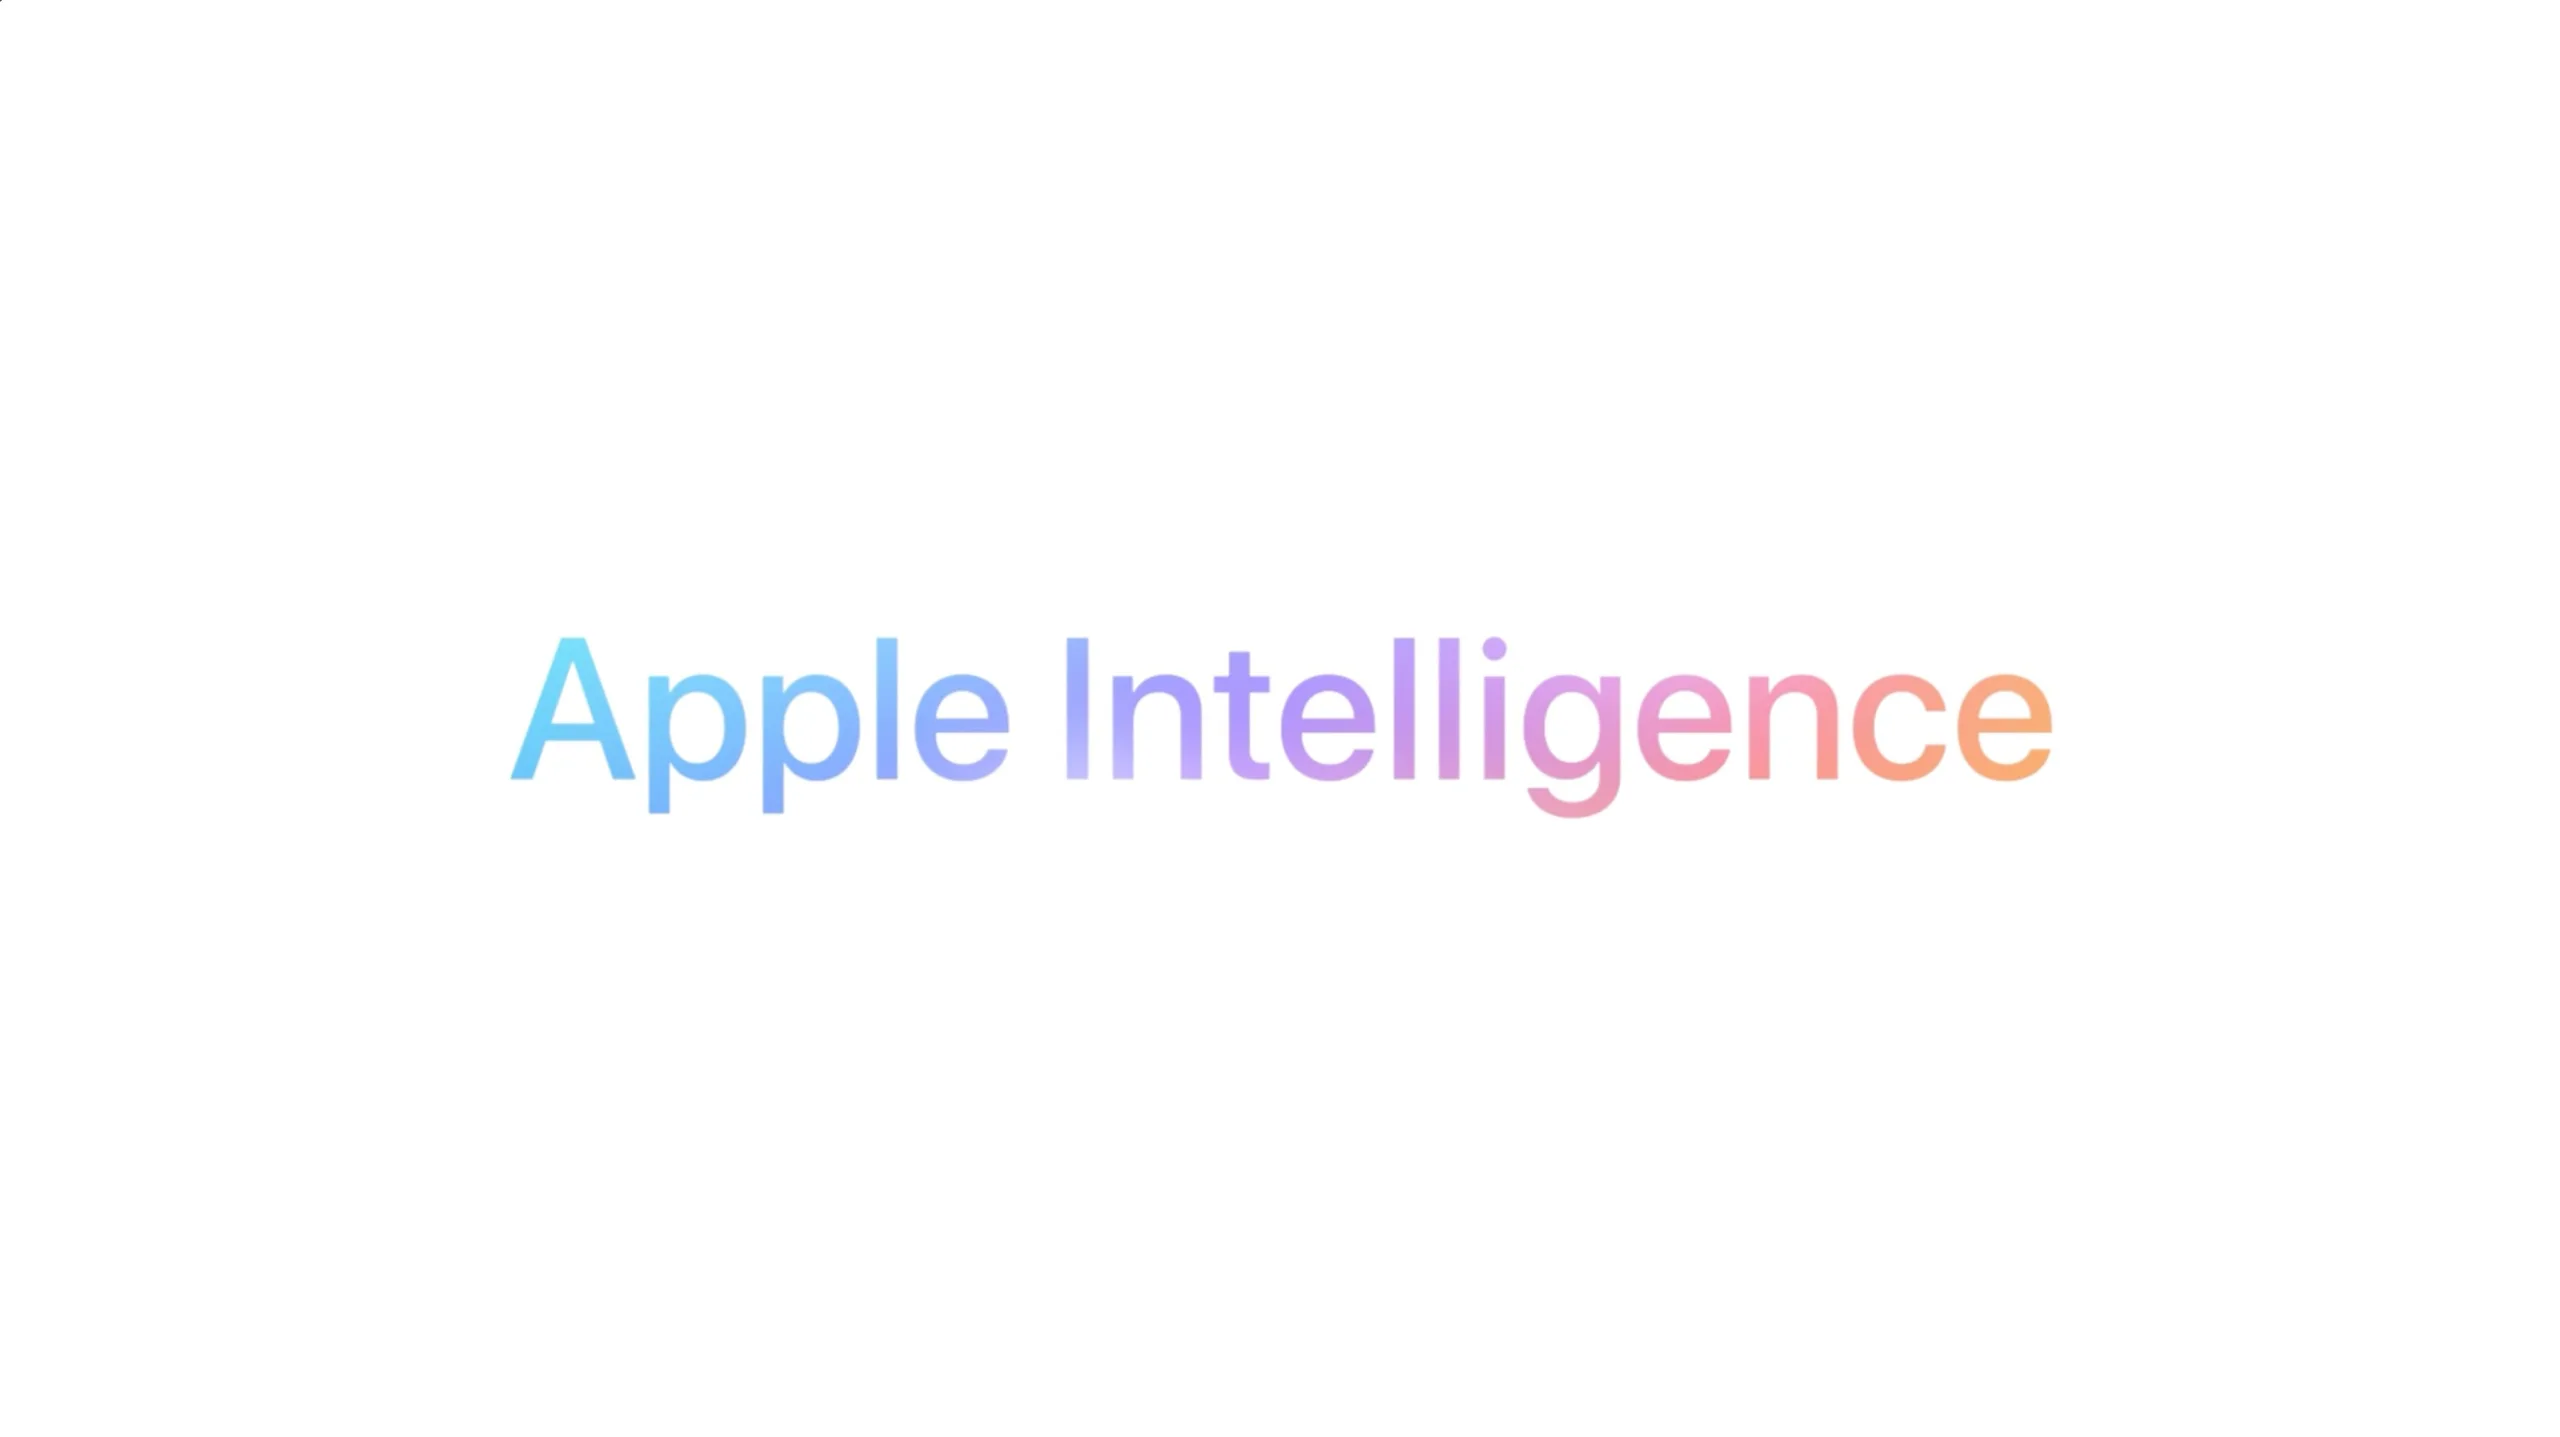 Official: This is Apple Intelligence, Apple’s own version of AI